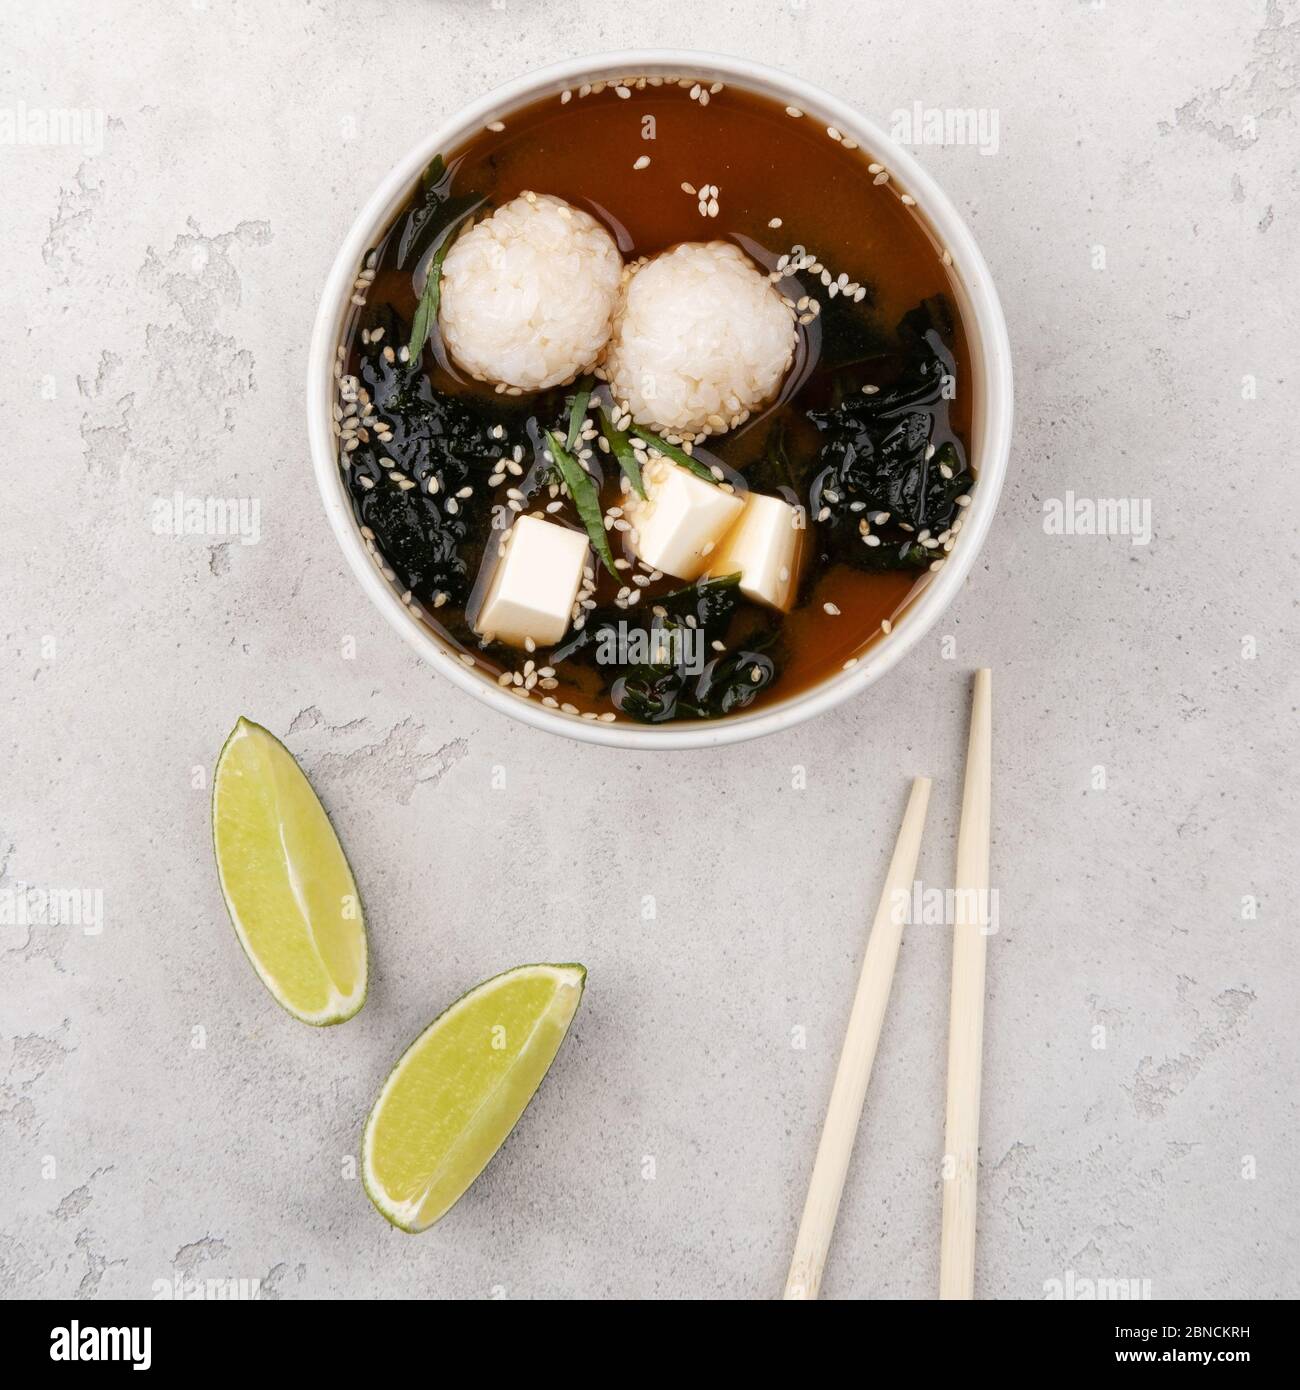 Miso soup. A traditional Japanese dish. Stock Photo